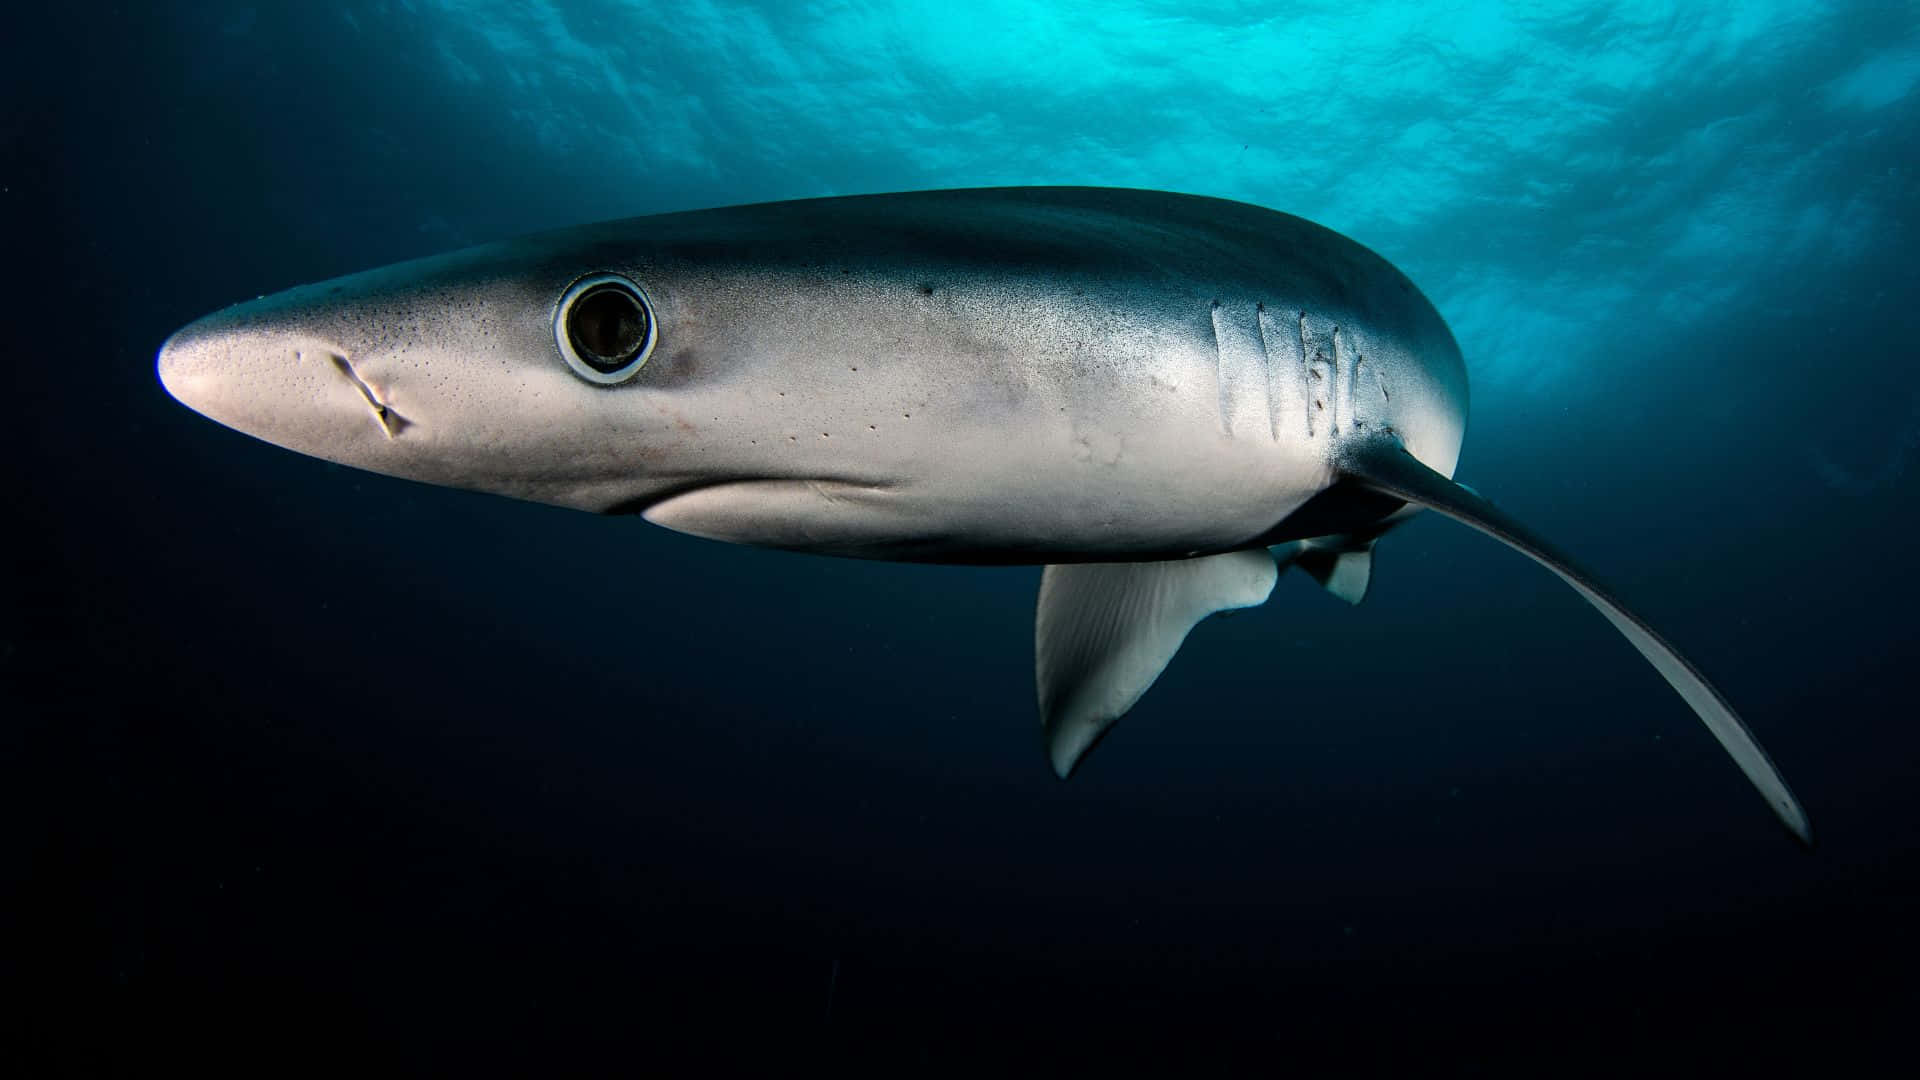 Unforgettable Encounter With The Intriguing Black Shark